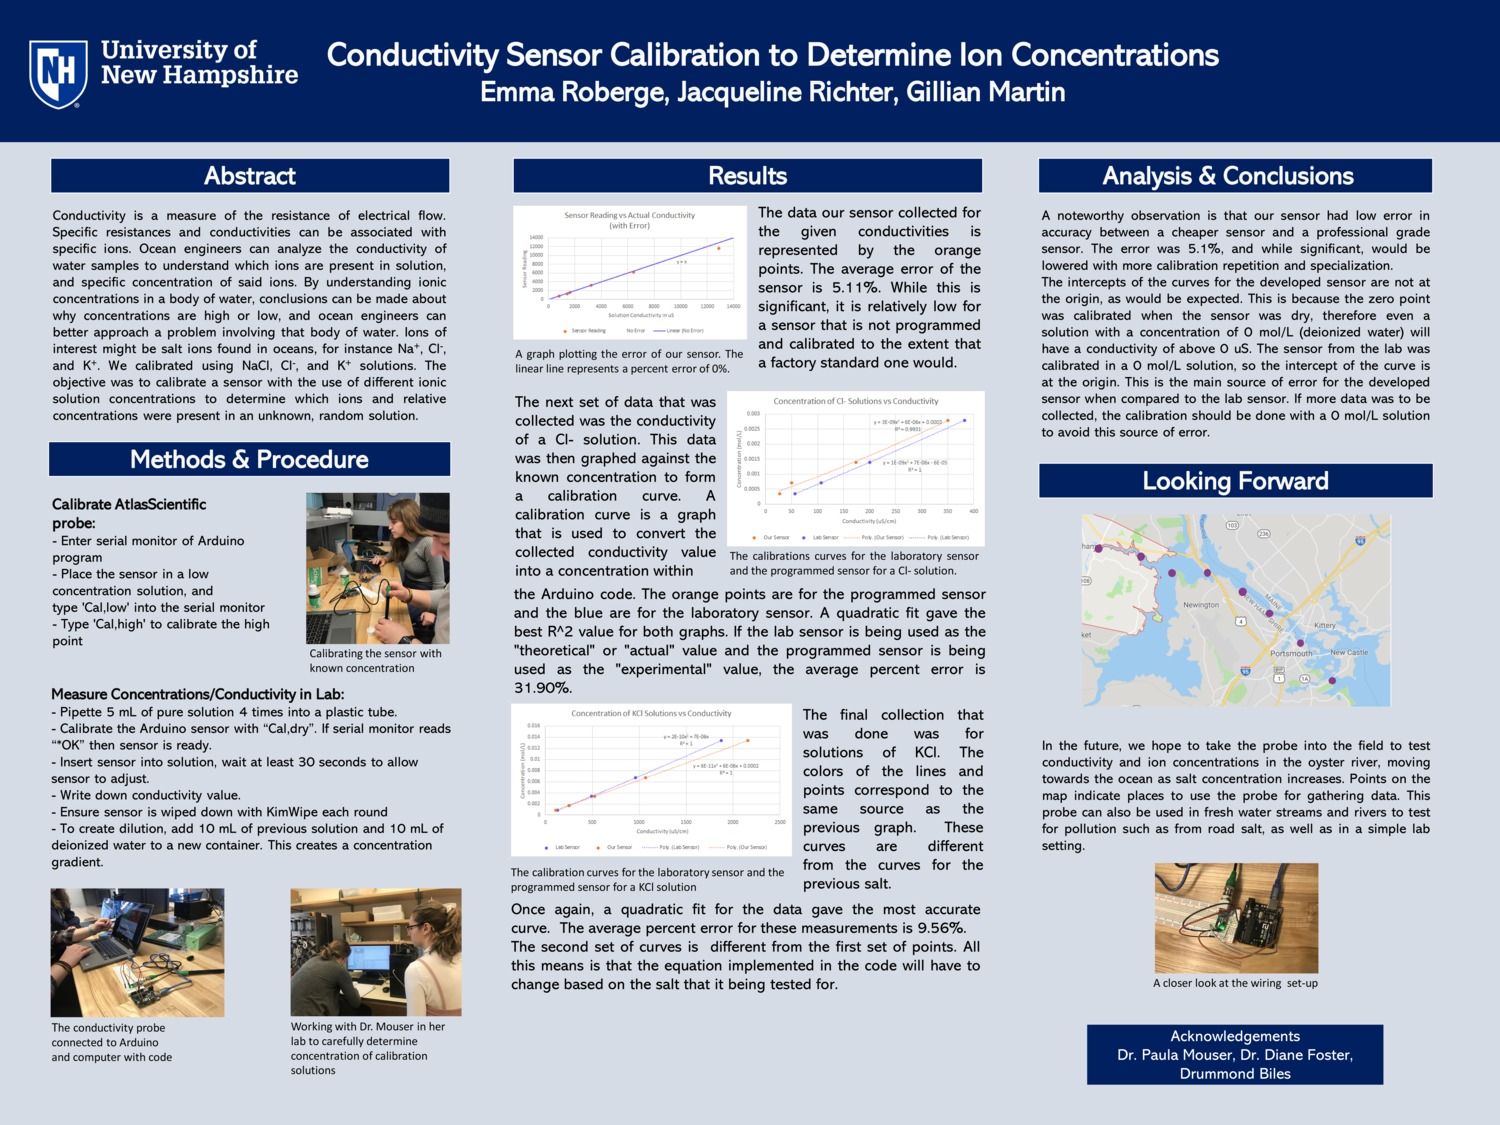 Conductivity Sensor Calibration To Determine Ion Concentrations by jgr1021